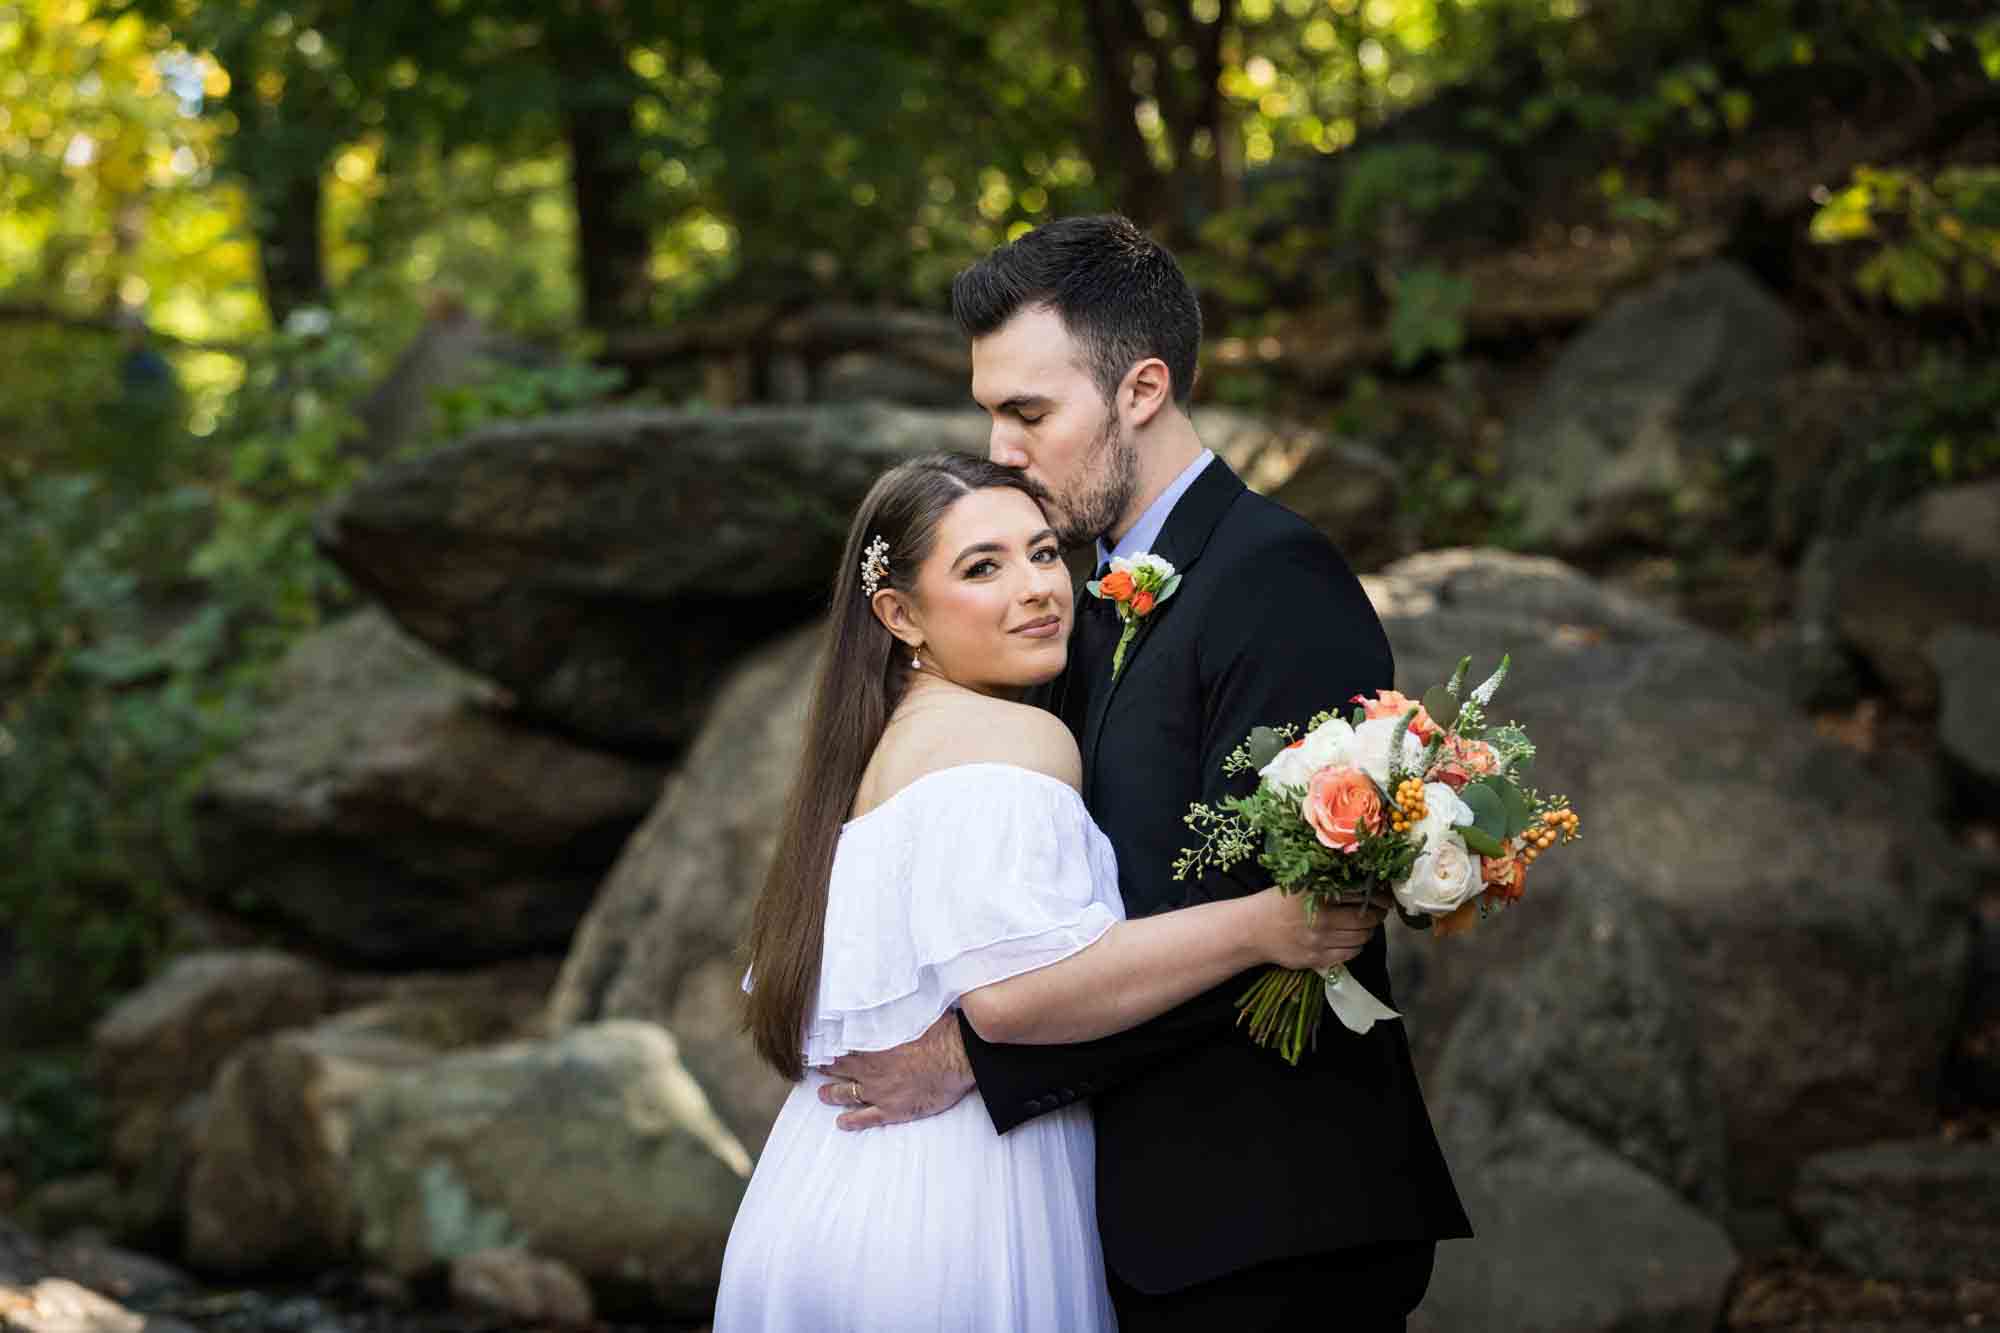 Bride and groom hugging in forest Article on how to elope in Central Park by NYC wedding photojournalist, Kelly Williams. Includes photos from a real wedding near Bow Bridge.